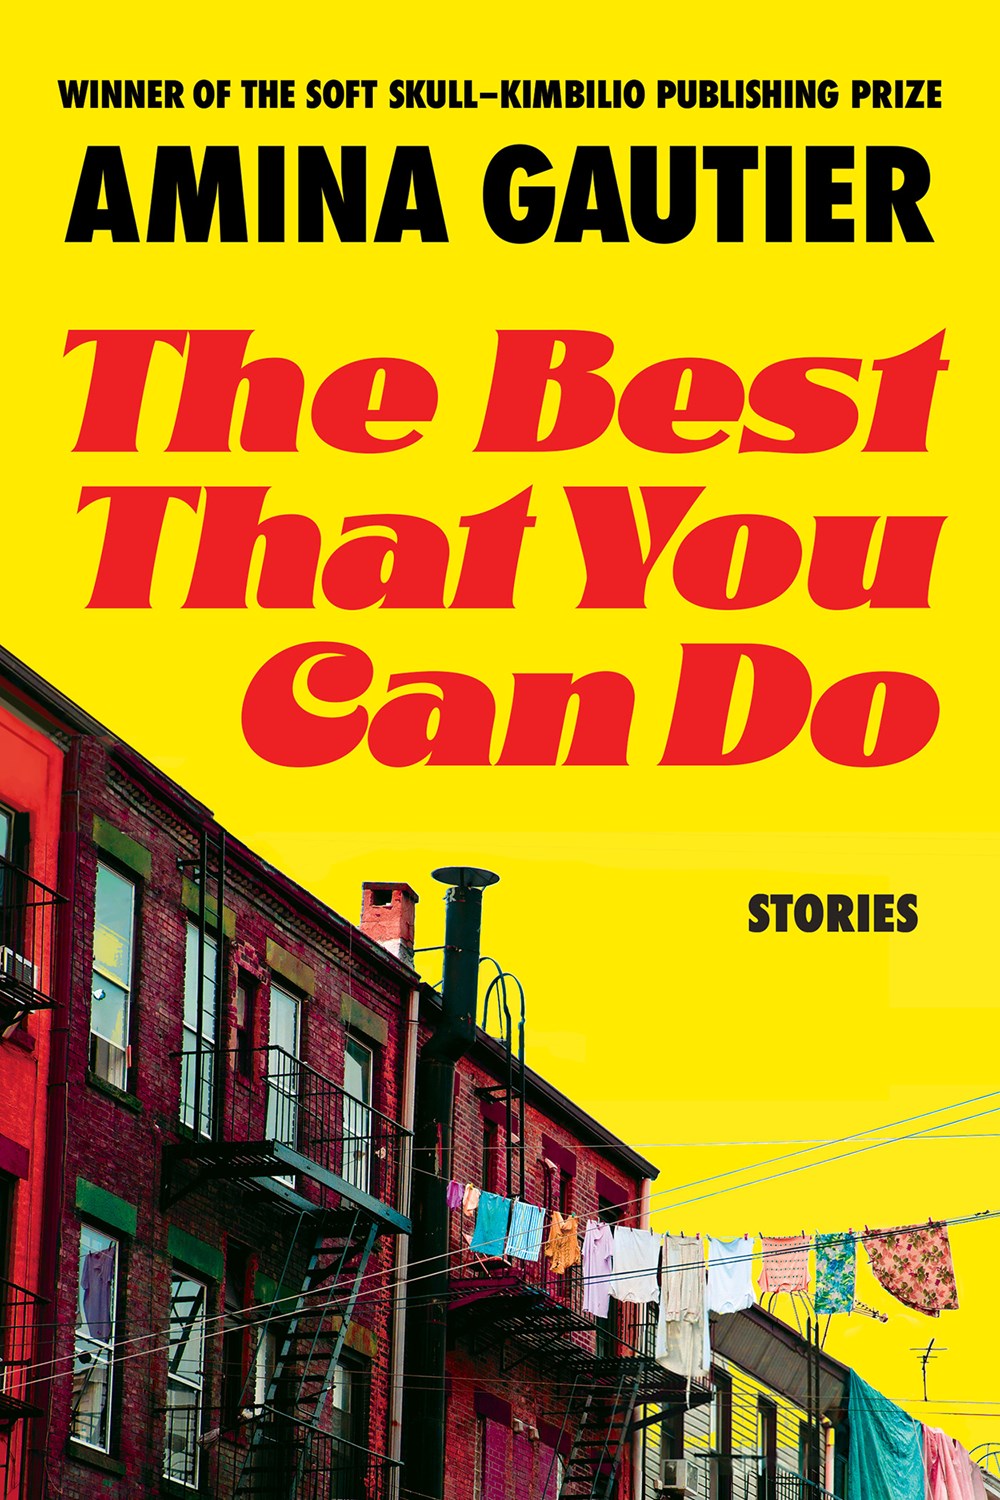 The Best That You Can Do: Stories by Amina Gautier (Paperback)